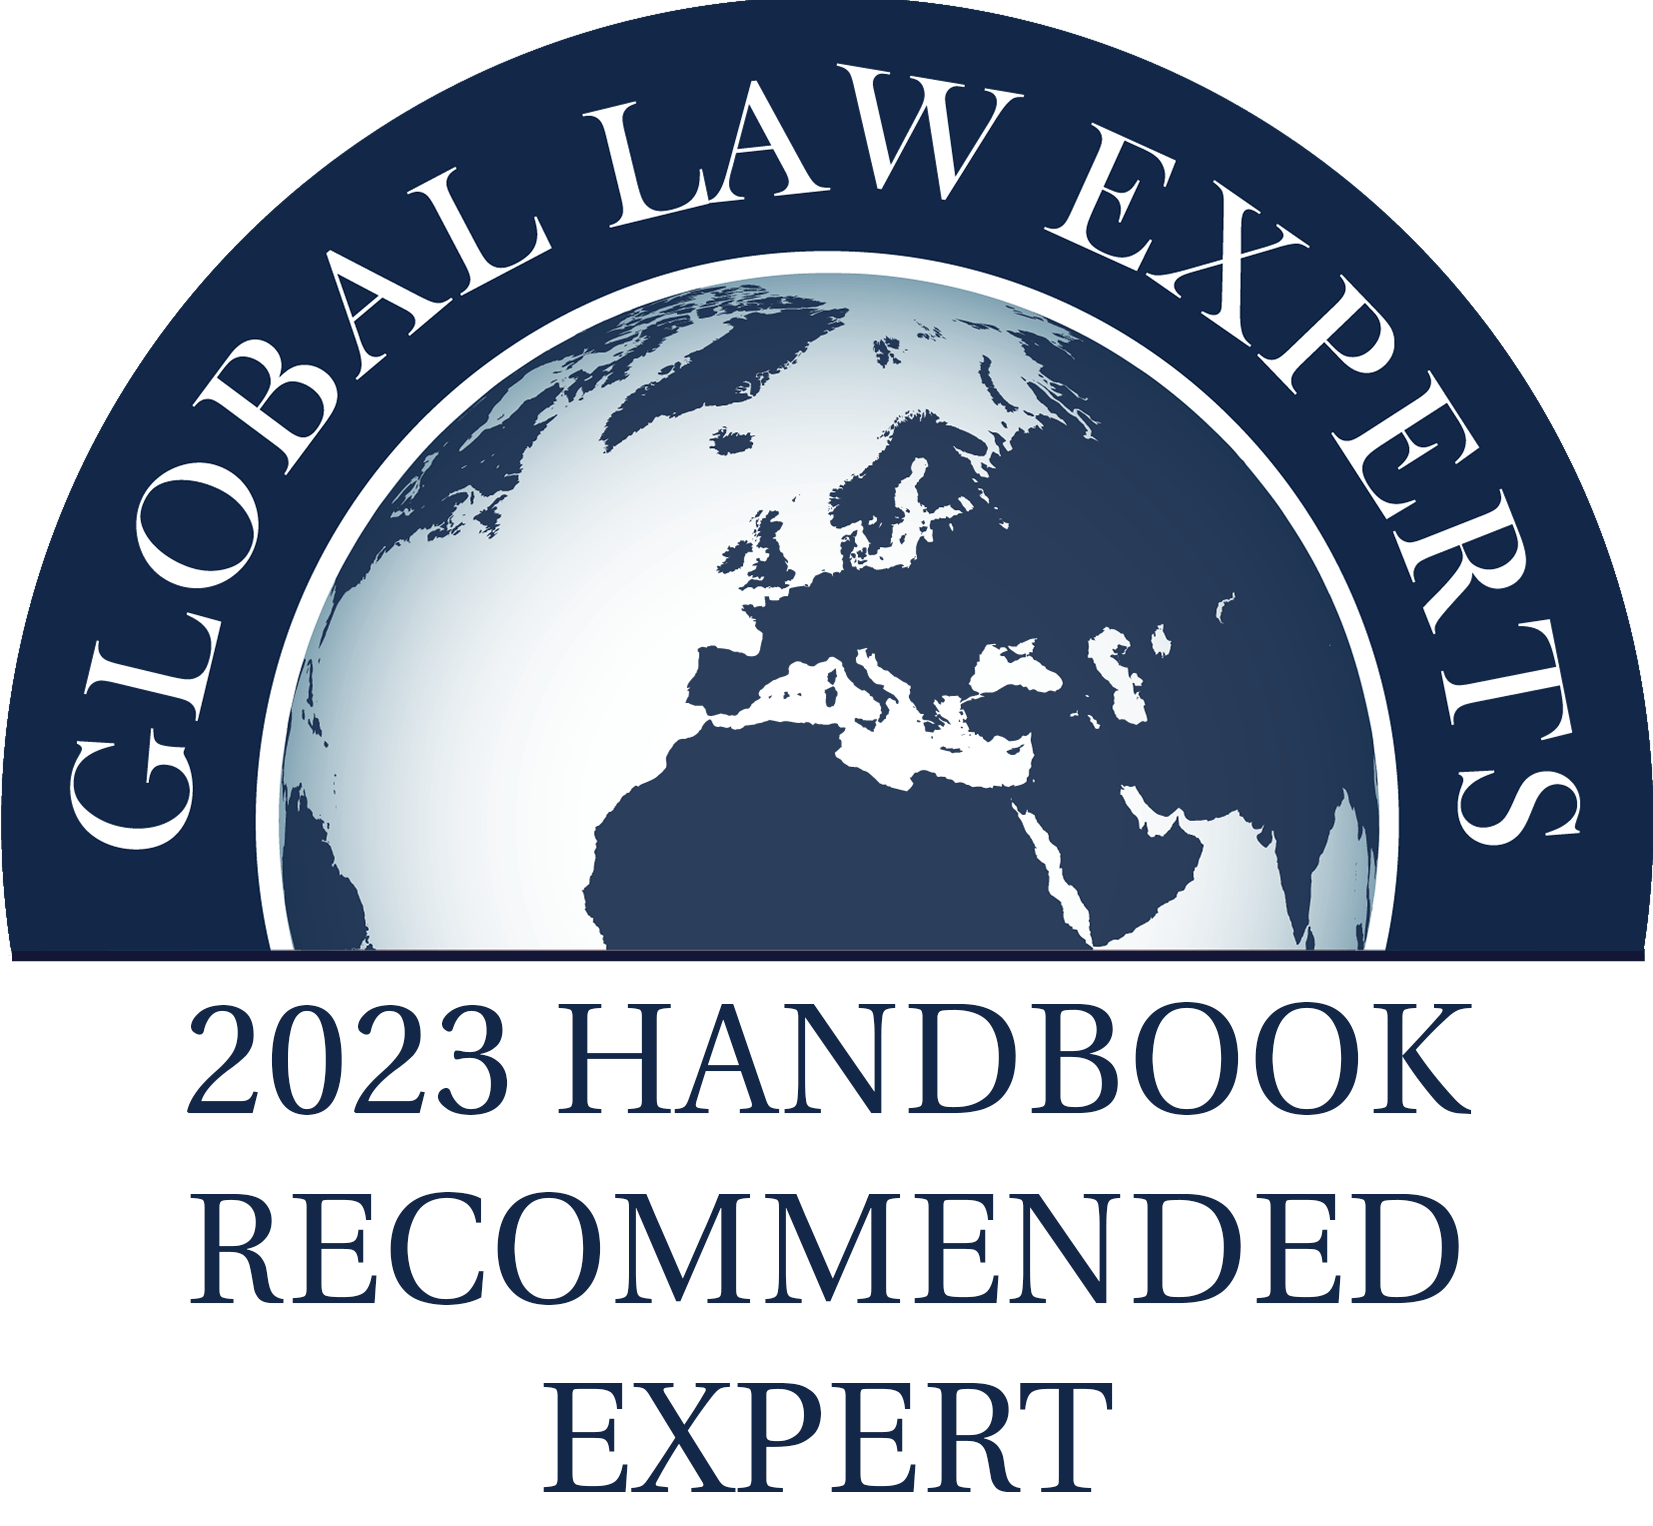 Gle 2023 handbook recommended expert